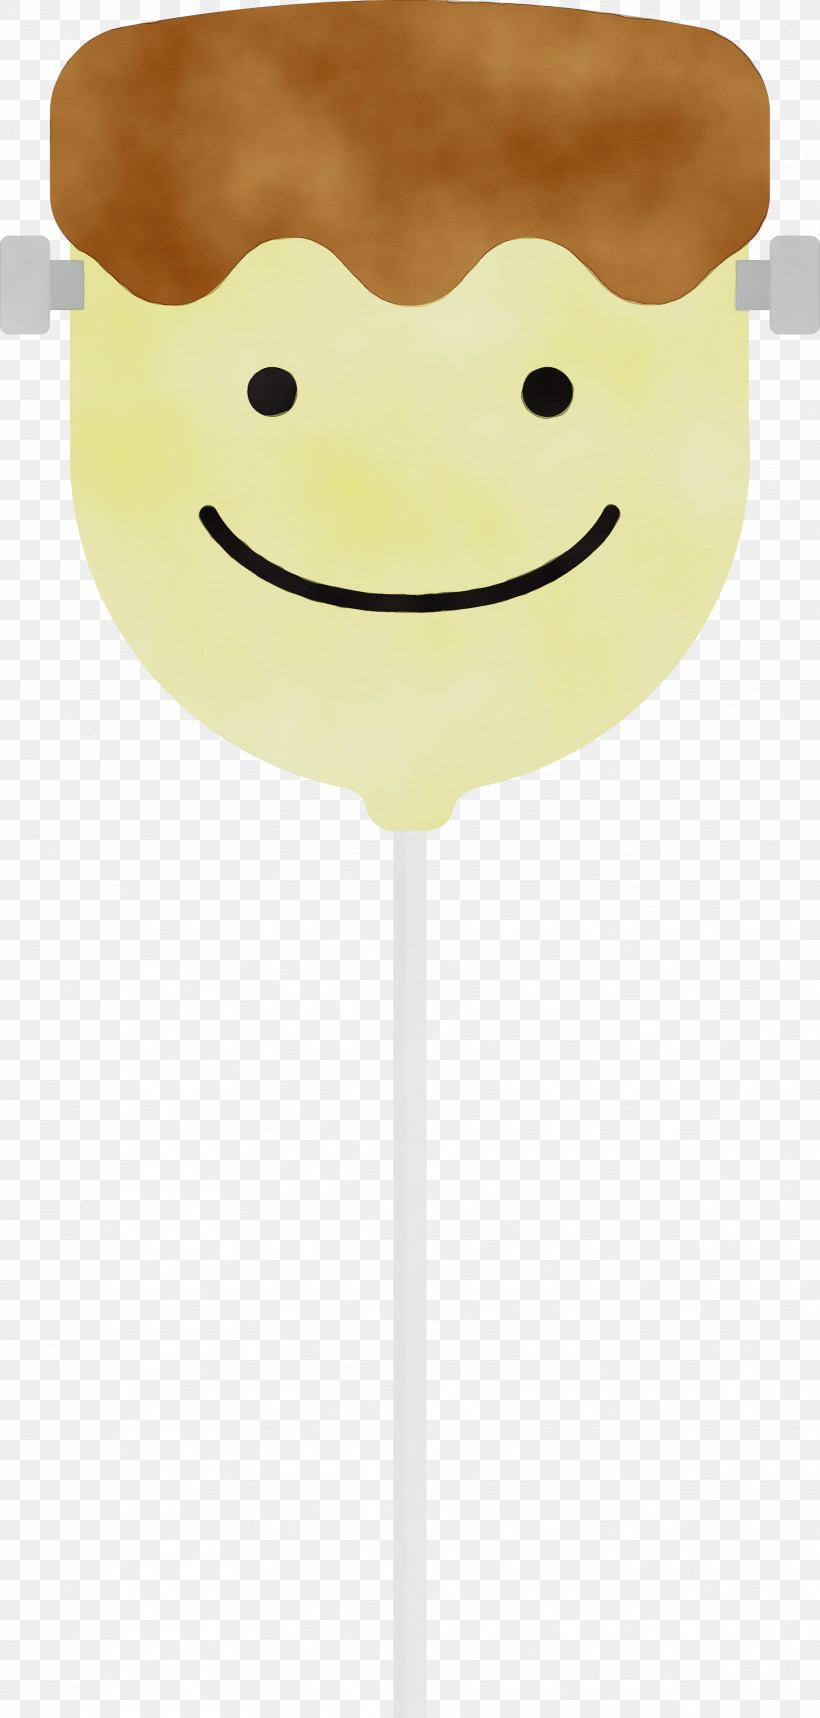 Smiley Yellow Cartoon Science Biology, PNG, 1827x3828px, Halloween, Biology, Cartoon, Paint, Science Download Free